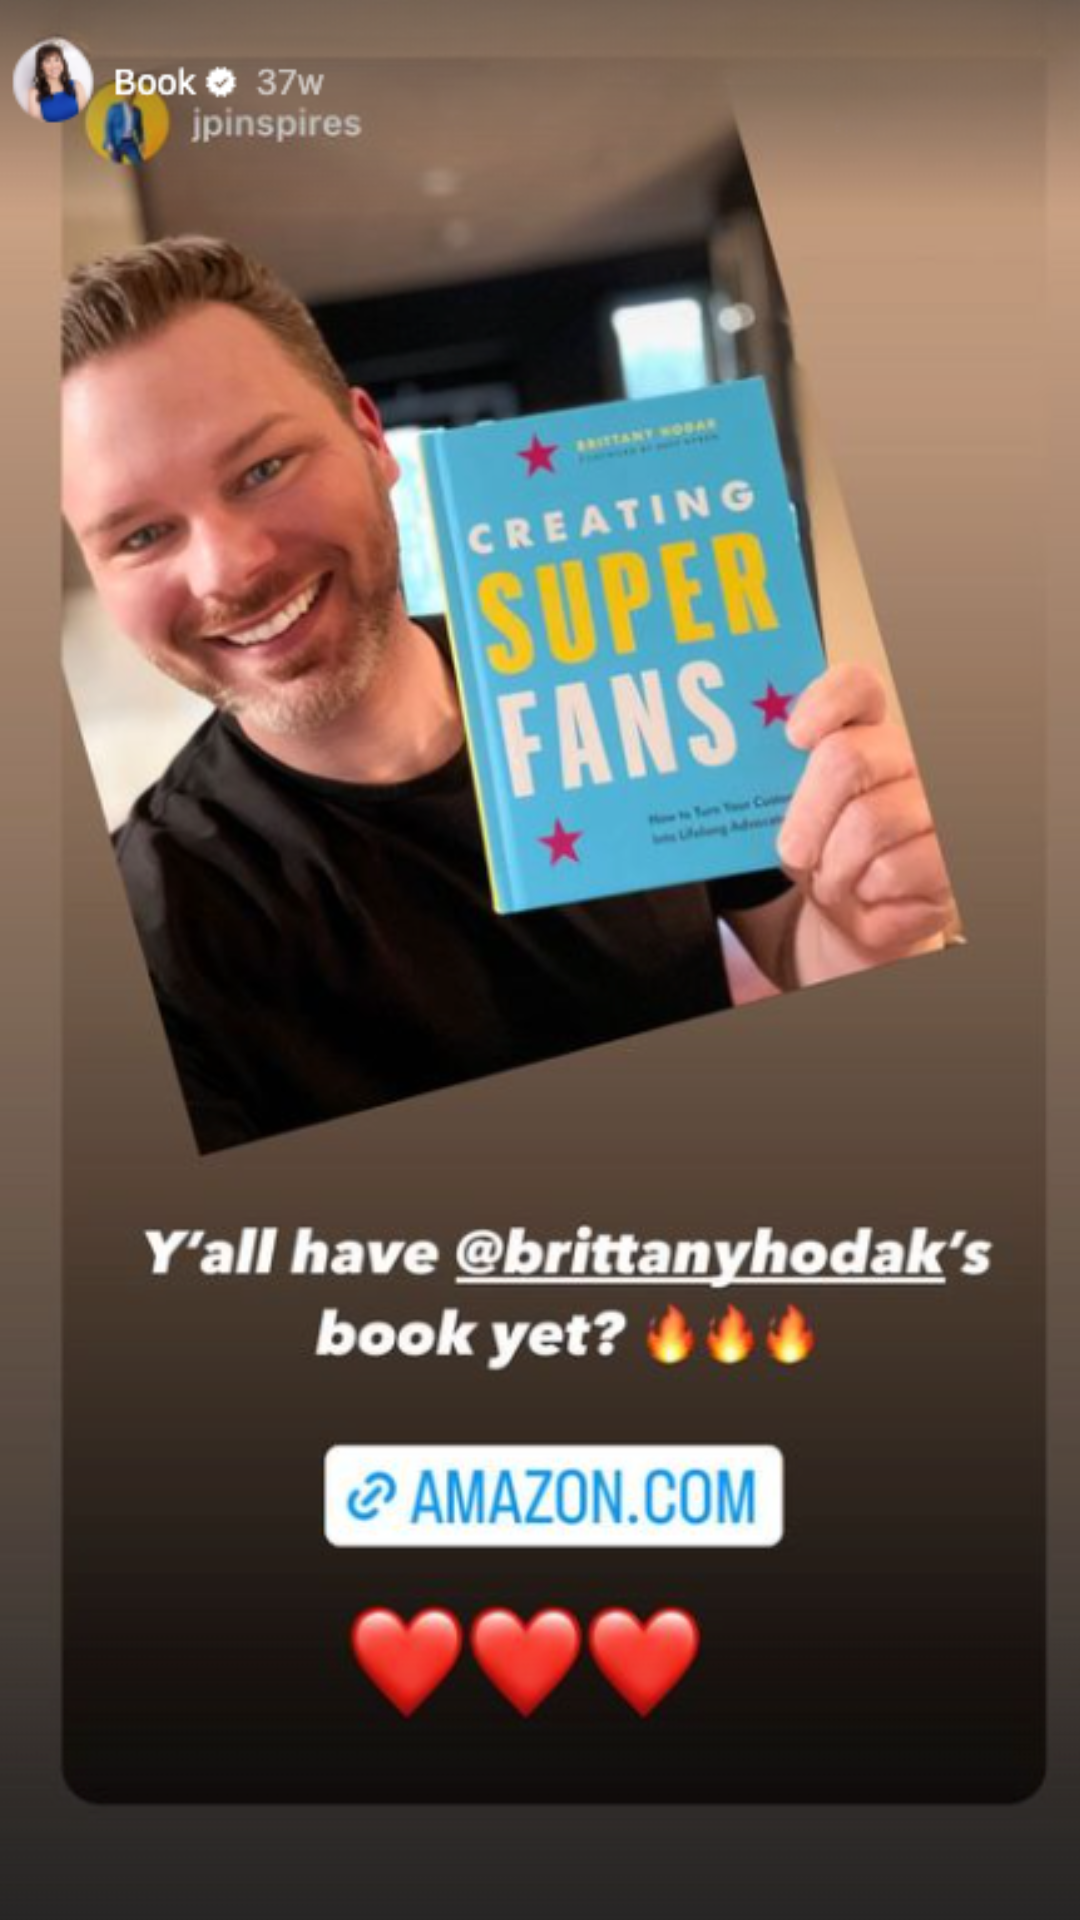 Brittany Hodak fan asking if people have read her book yet